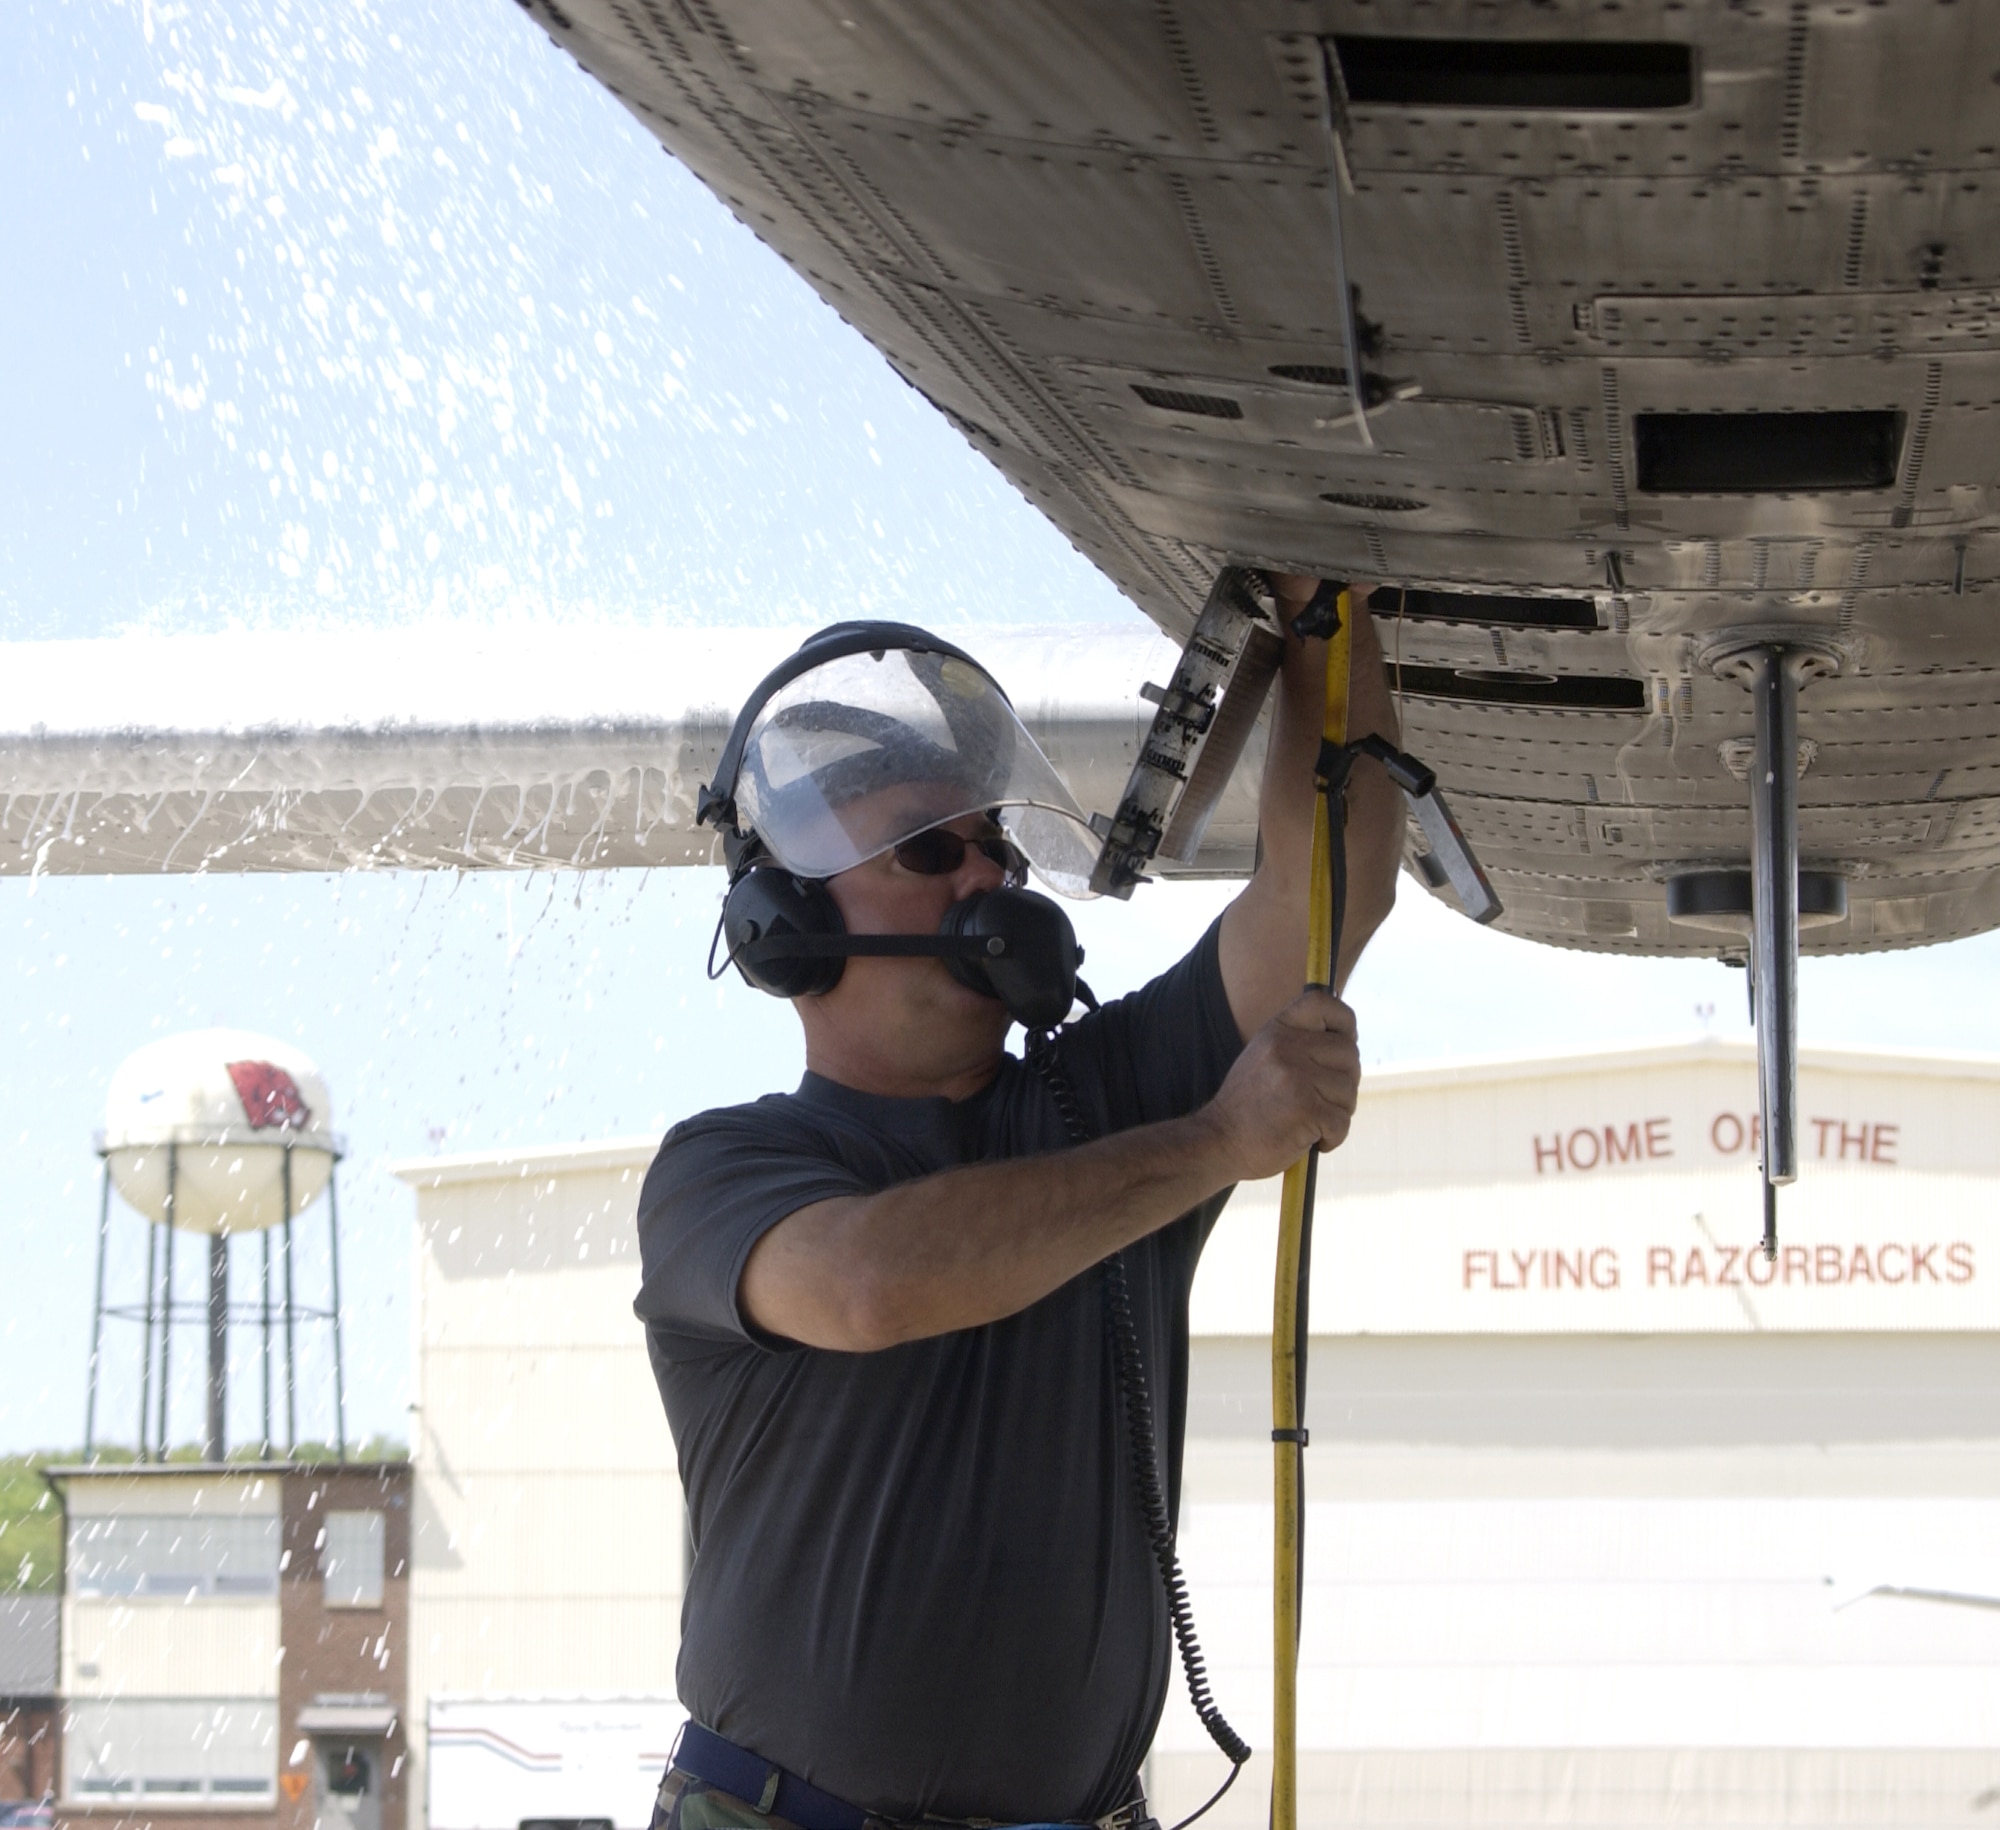 Master Sgt. Ed Fairchild, 717th Aircraft Maintenance Squadron crew chief, disconnects a compressor hose from an A-10 Thunderbolt II after performing an engine wash during Patriot Razorback, Fort Smith, Ark., in April 2007 (U.S. Air Force photo/Master Sgt. Greg Steele)